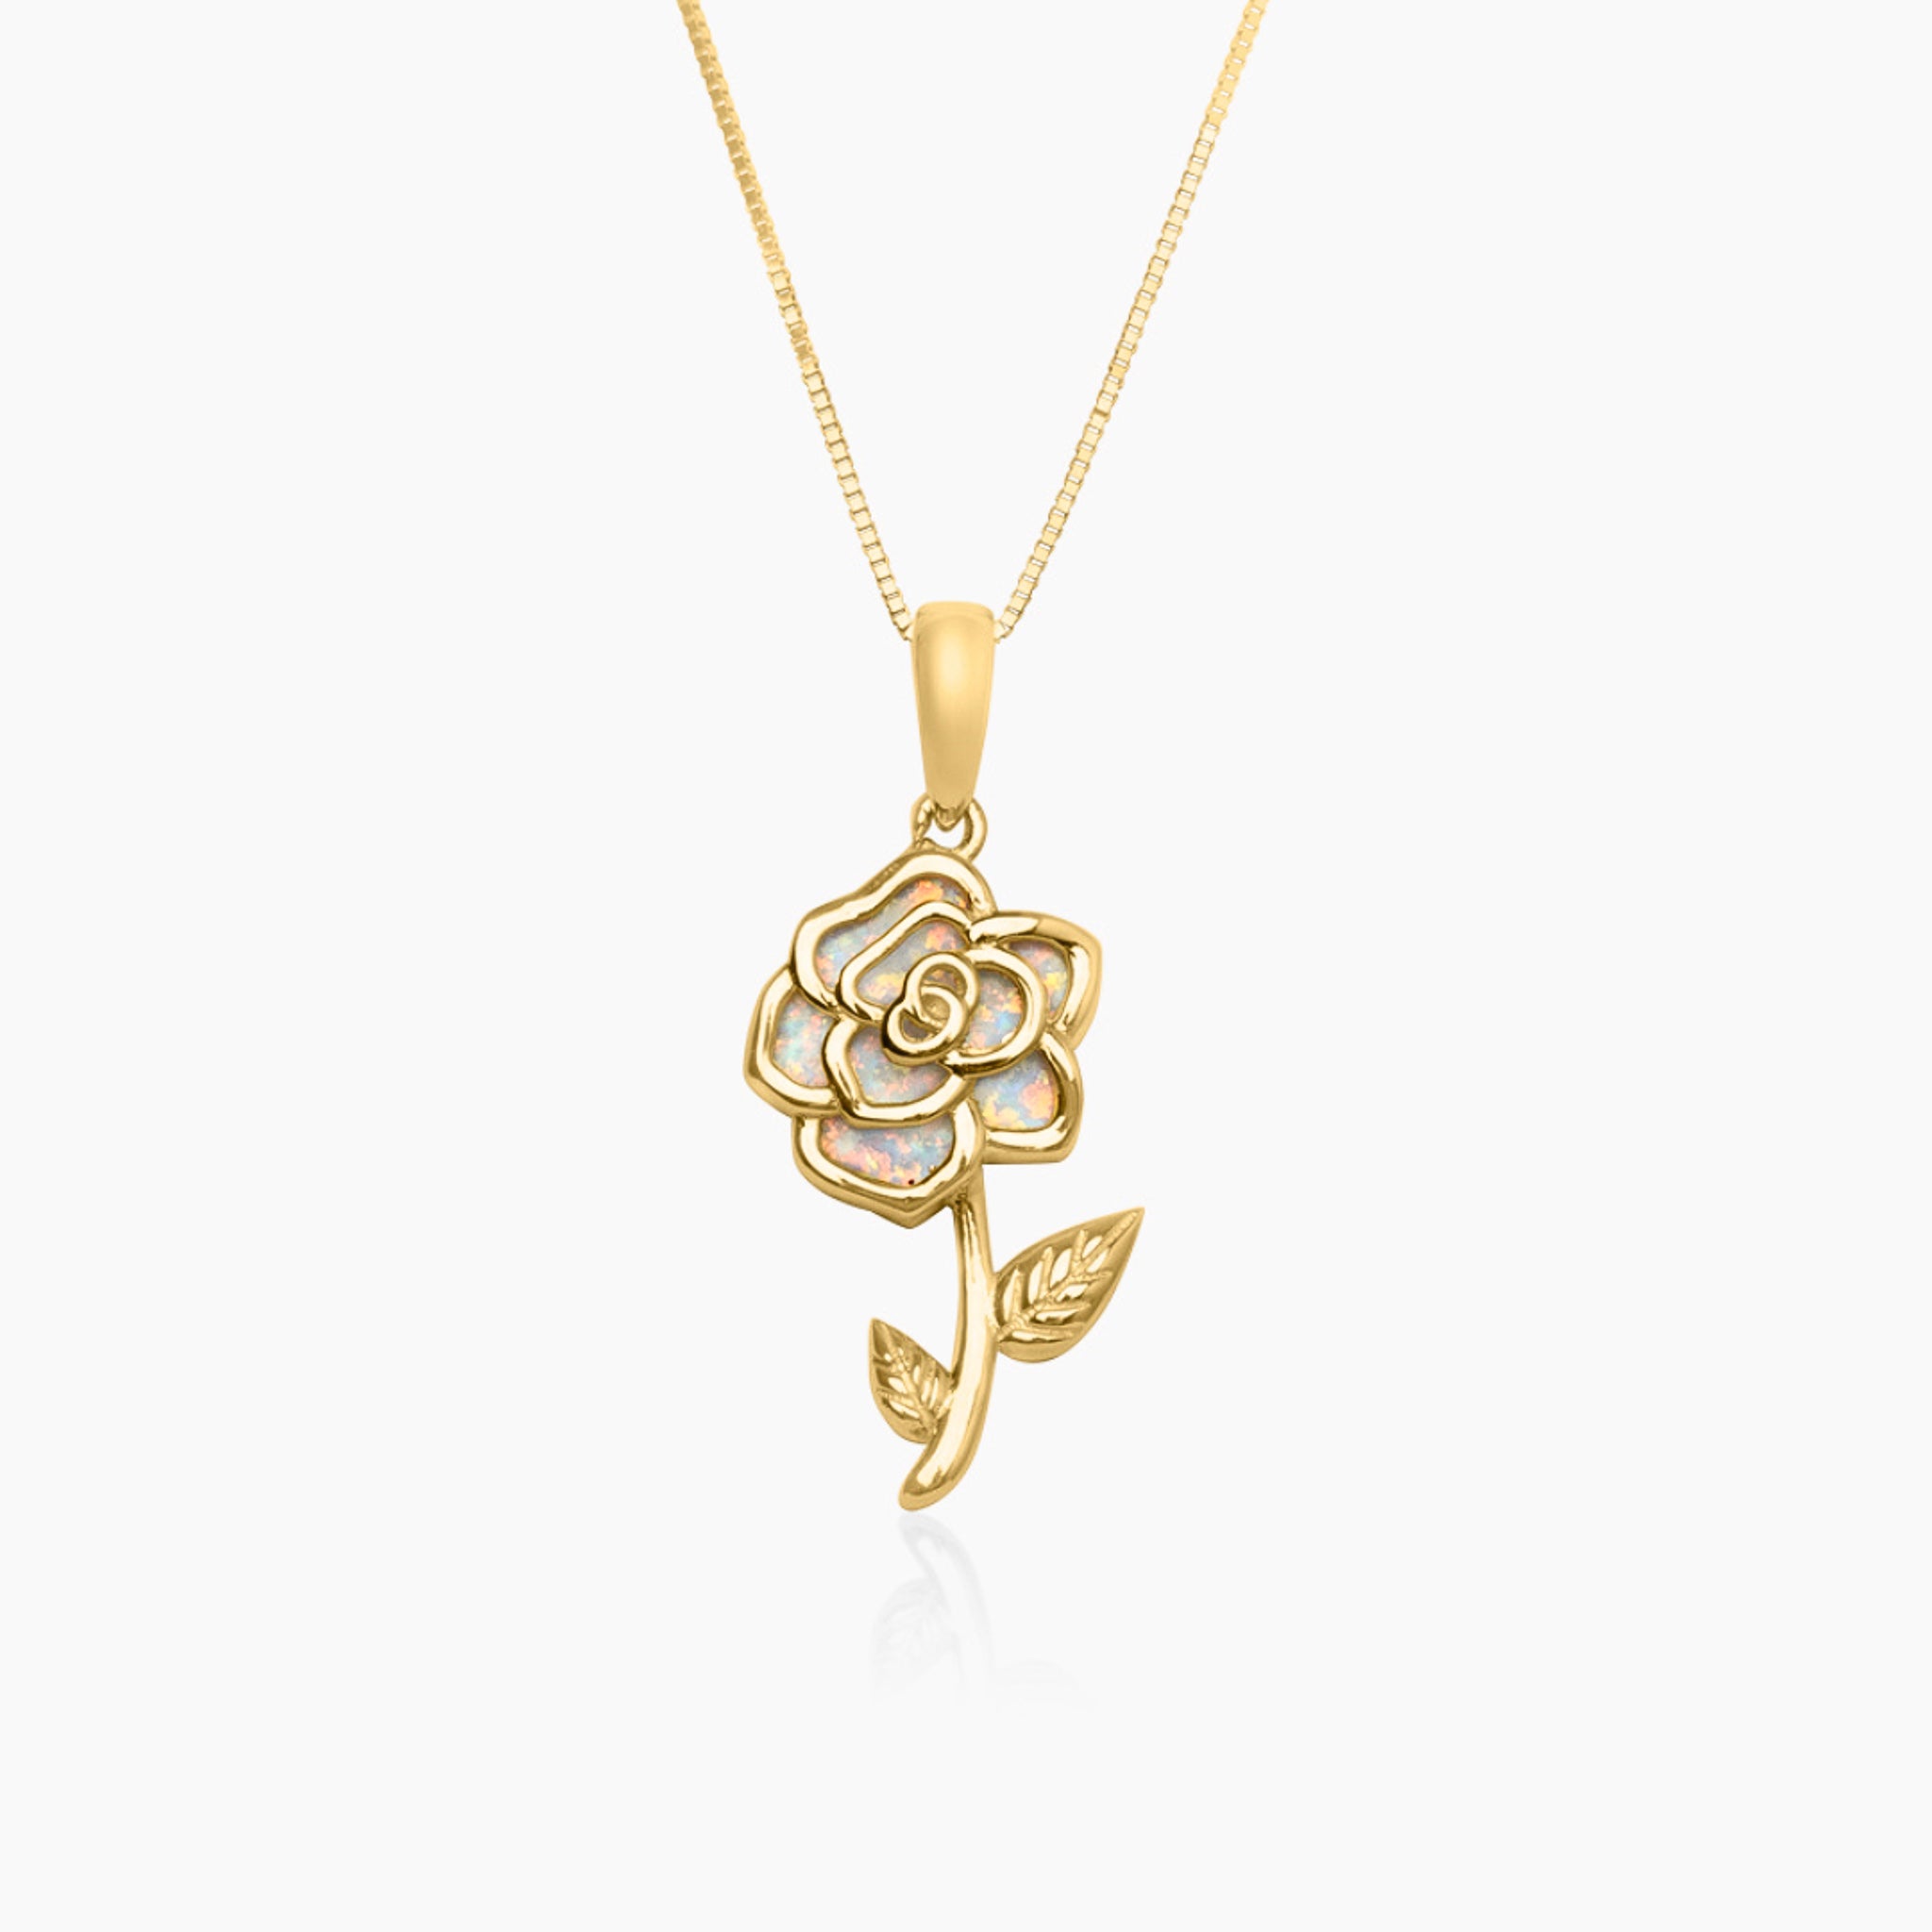 14K YELLOW GOLD OPAL ROSE NECKLACE